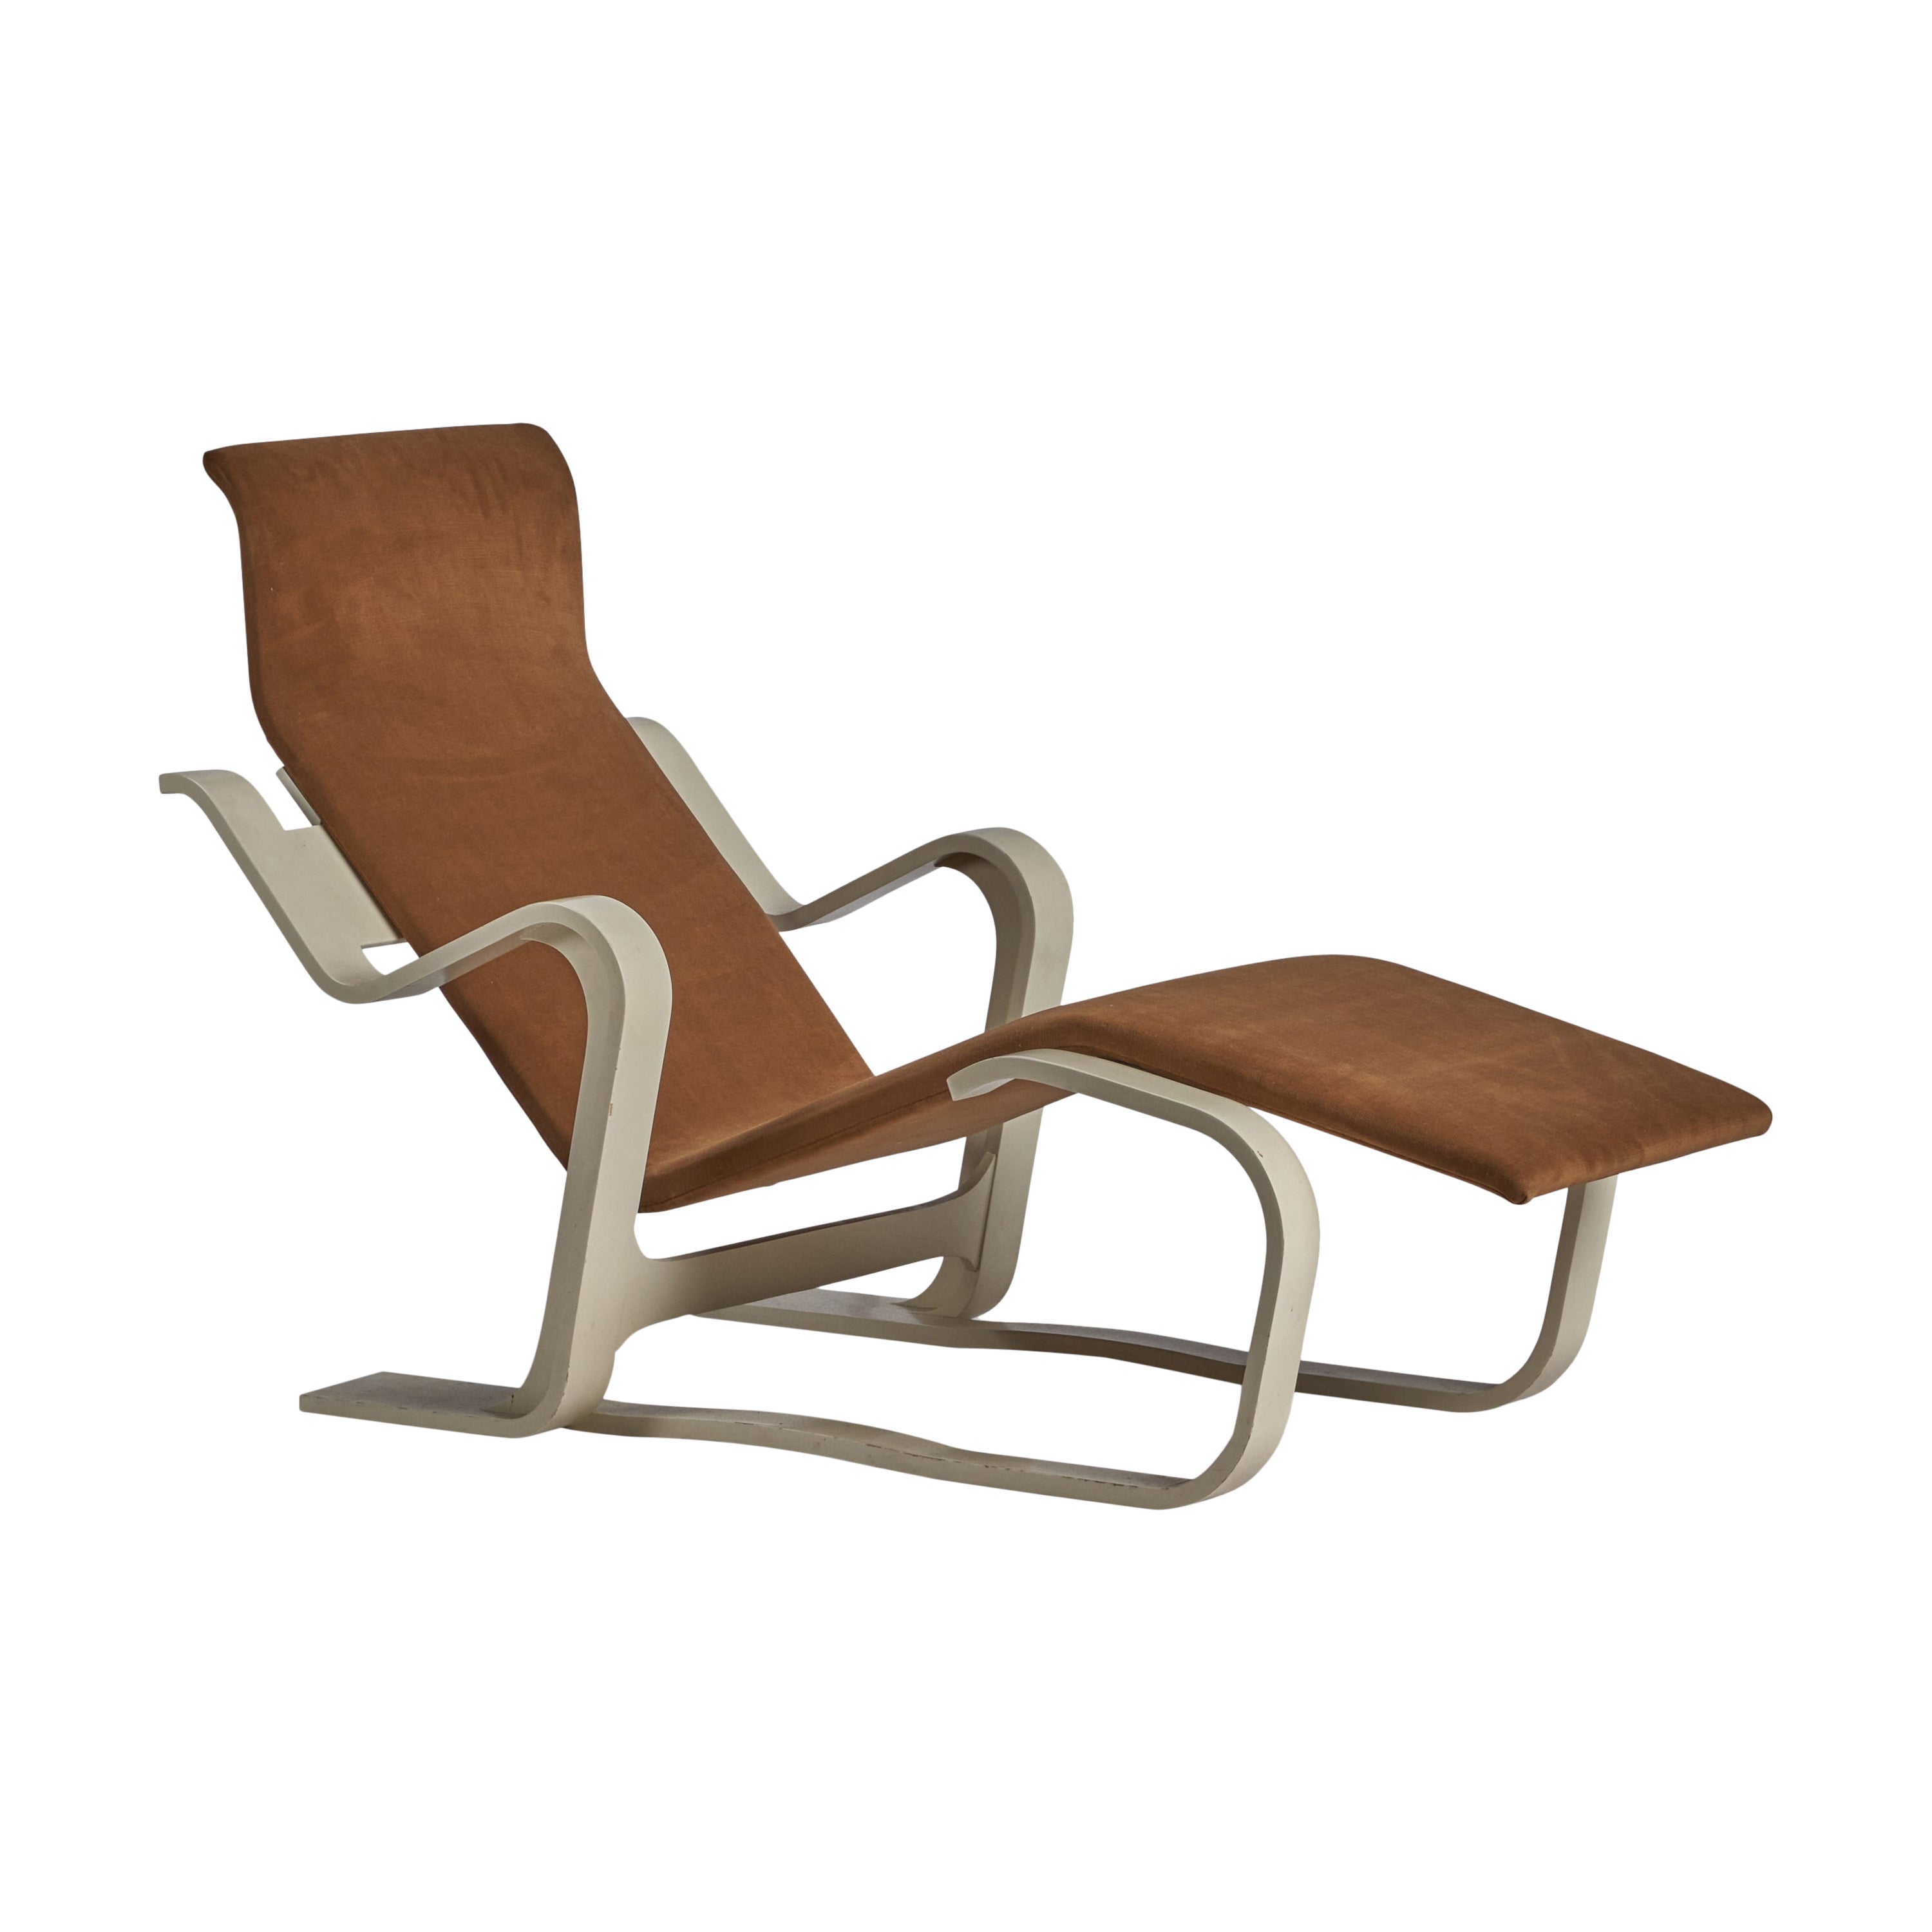 Marcel Breuer, Chaise Longue, Wood, Fabric, USA, 1960s For Sale